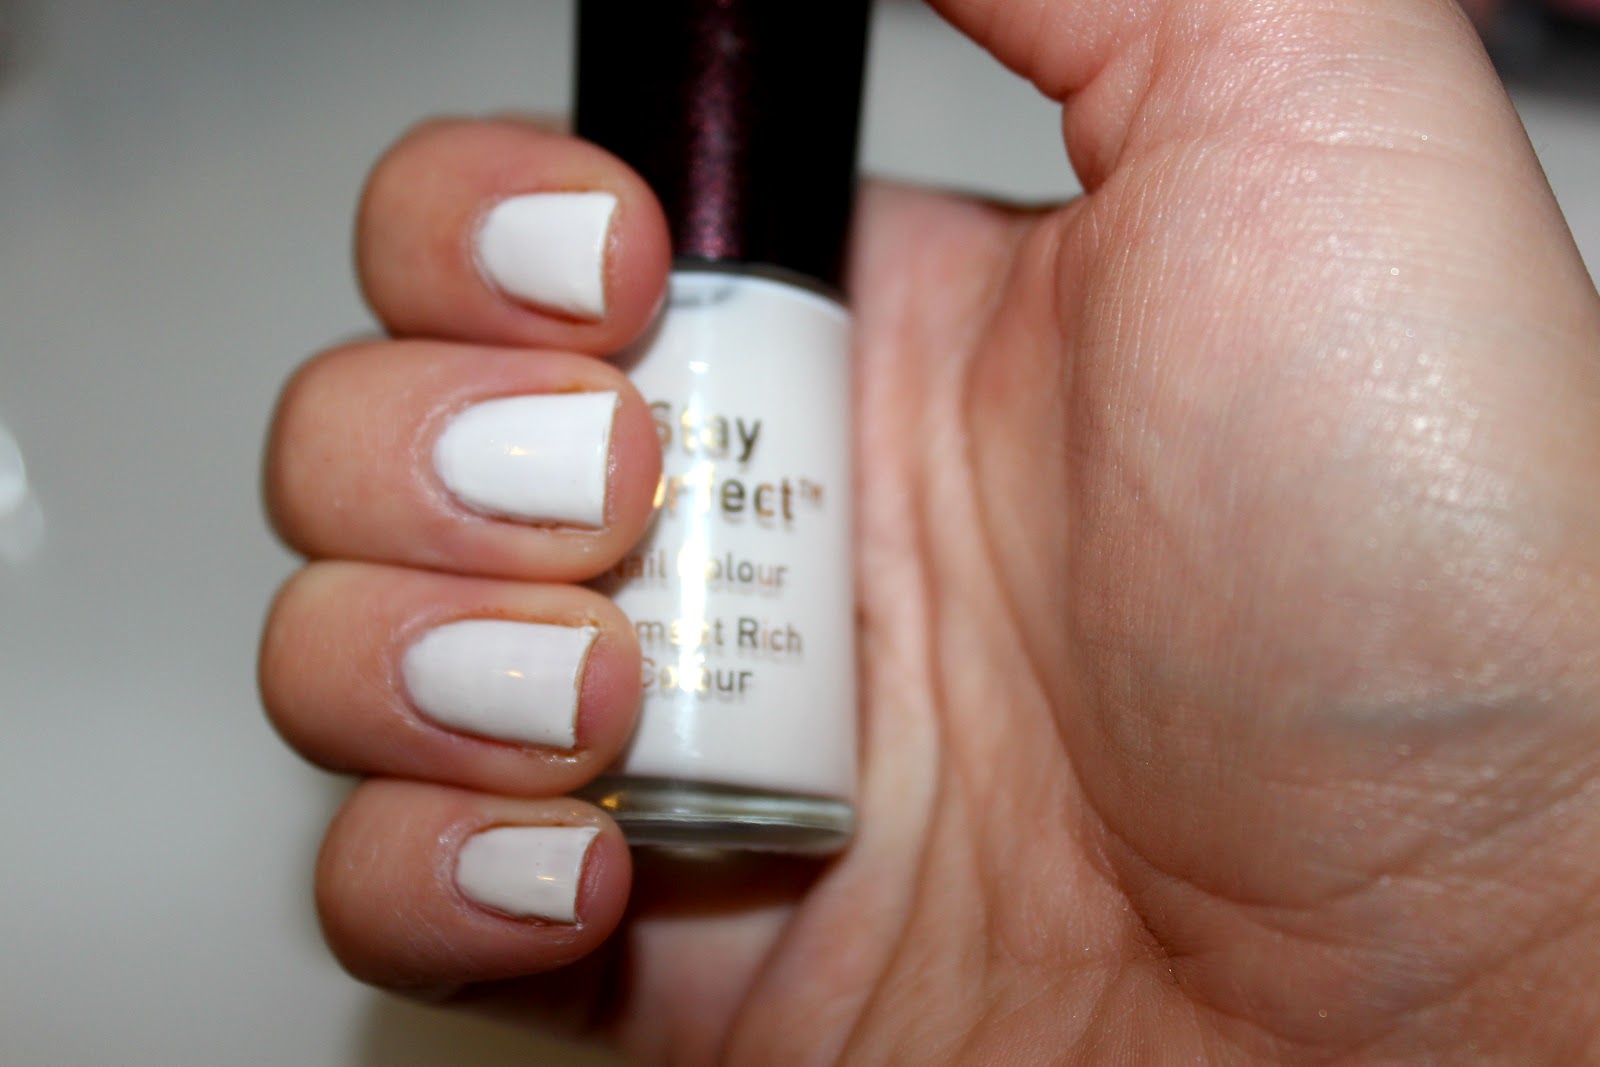 7. "Nail polish with gem accents" - wide 3